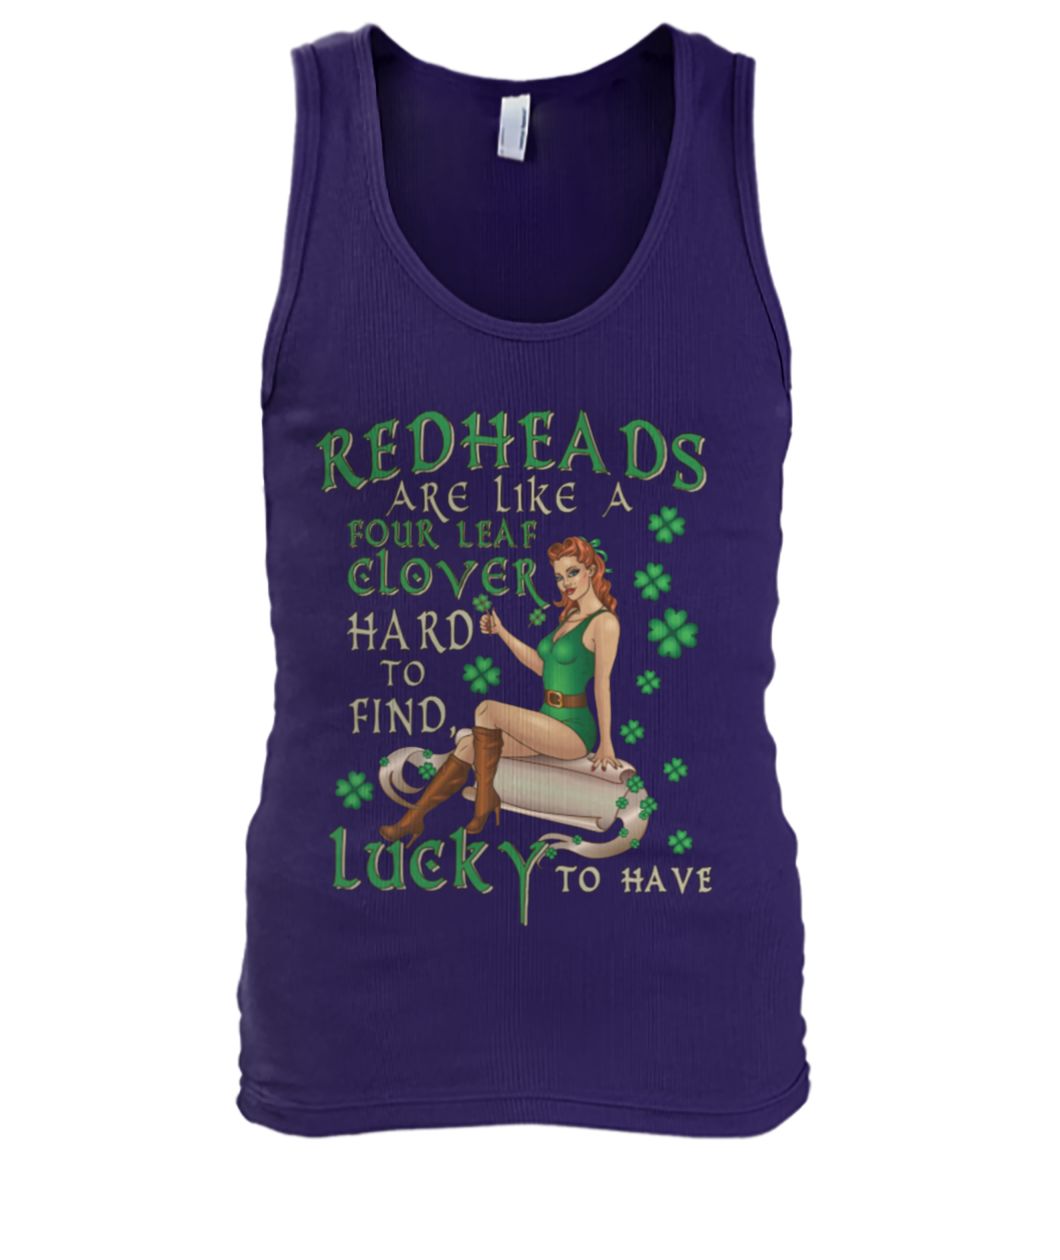 Redheads are like a four leaf clover hard to find lucky to have men's tank top